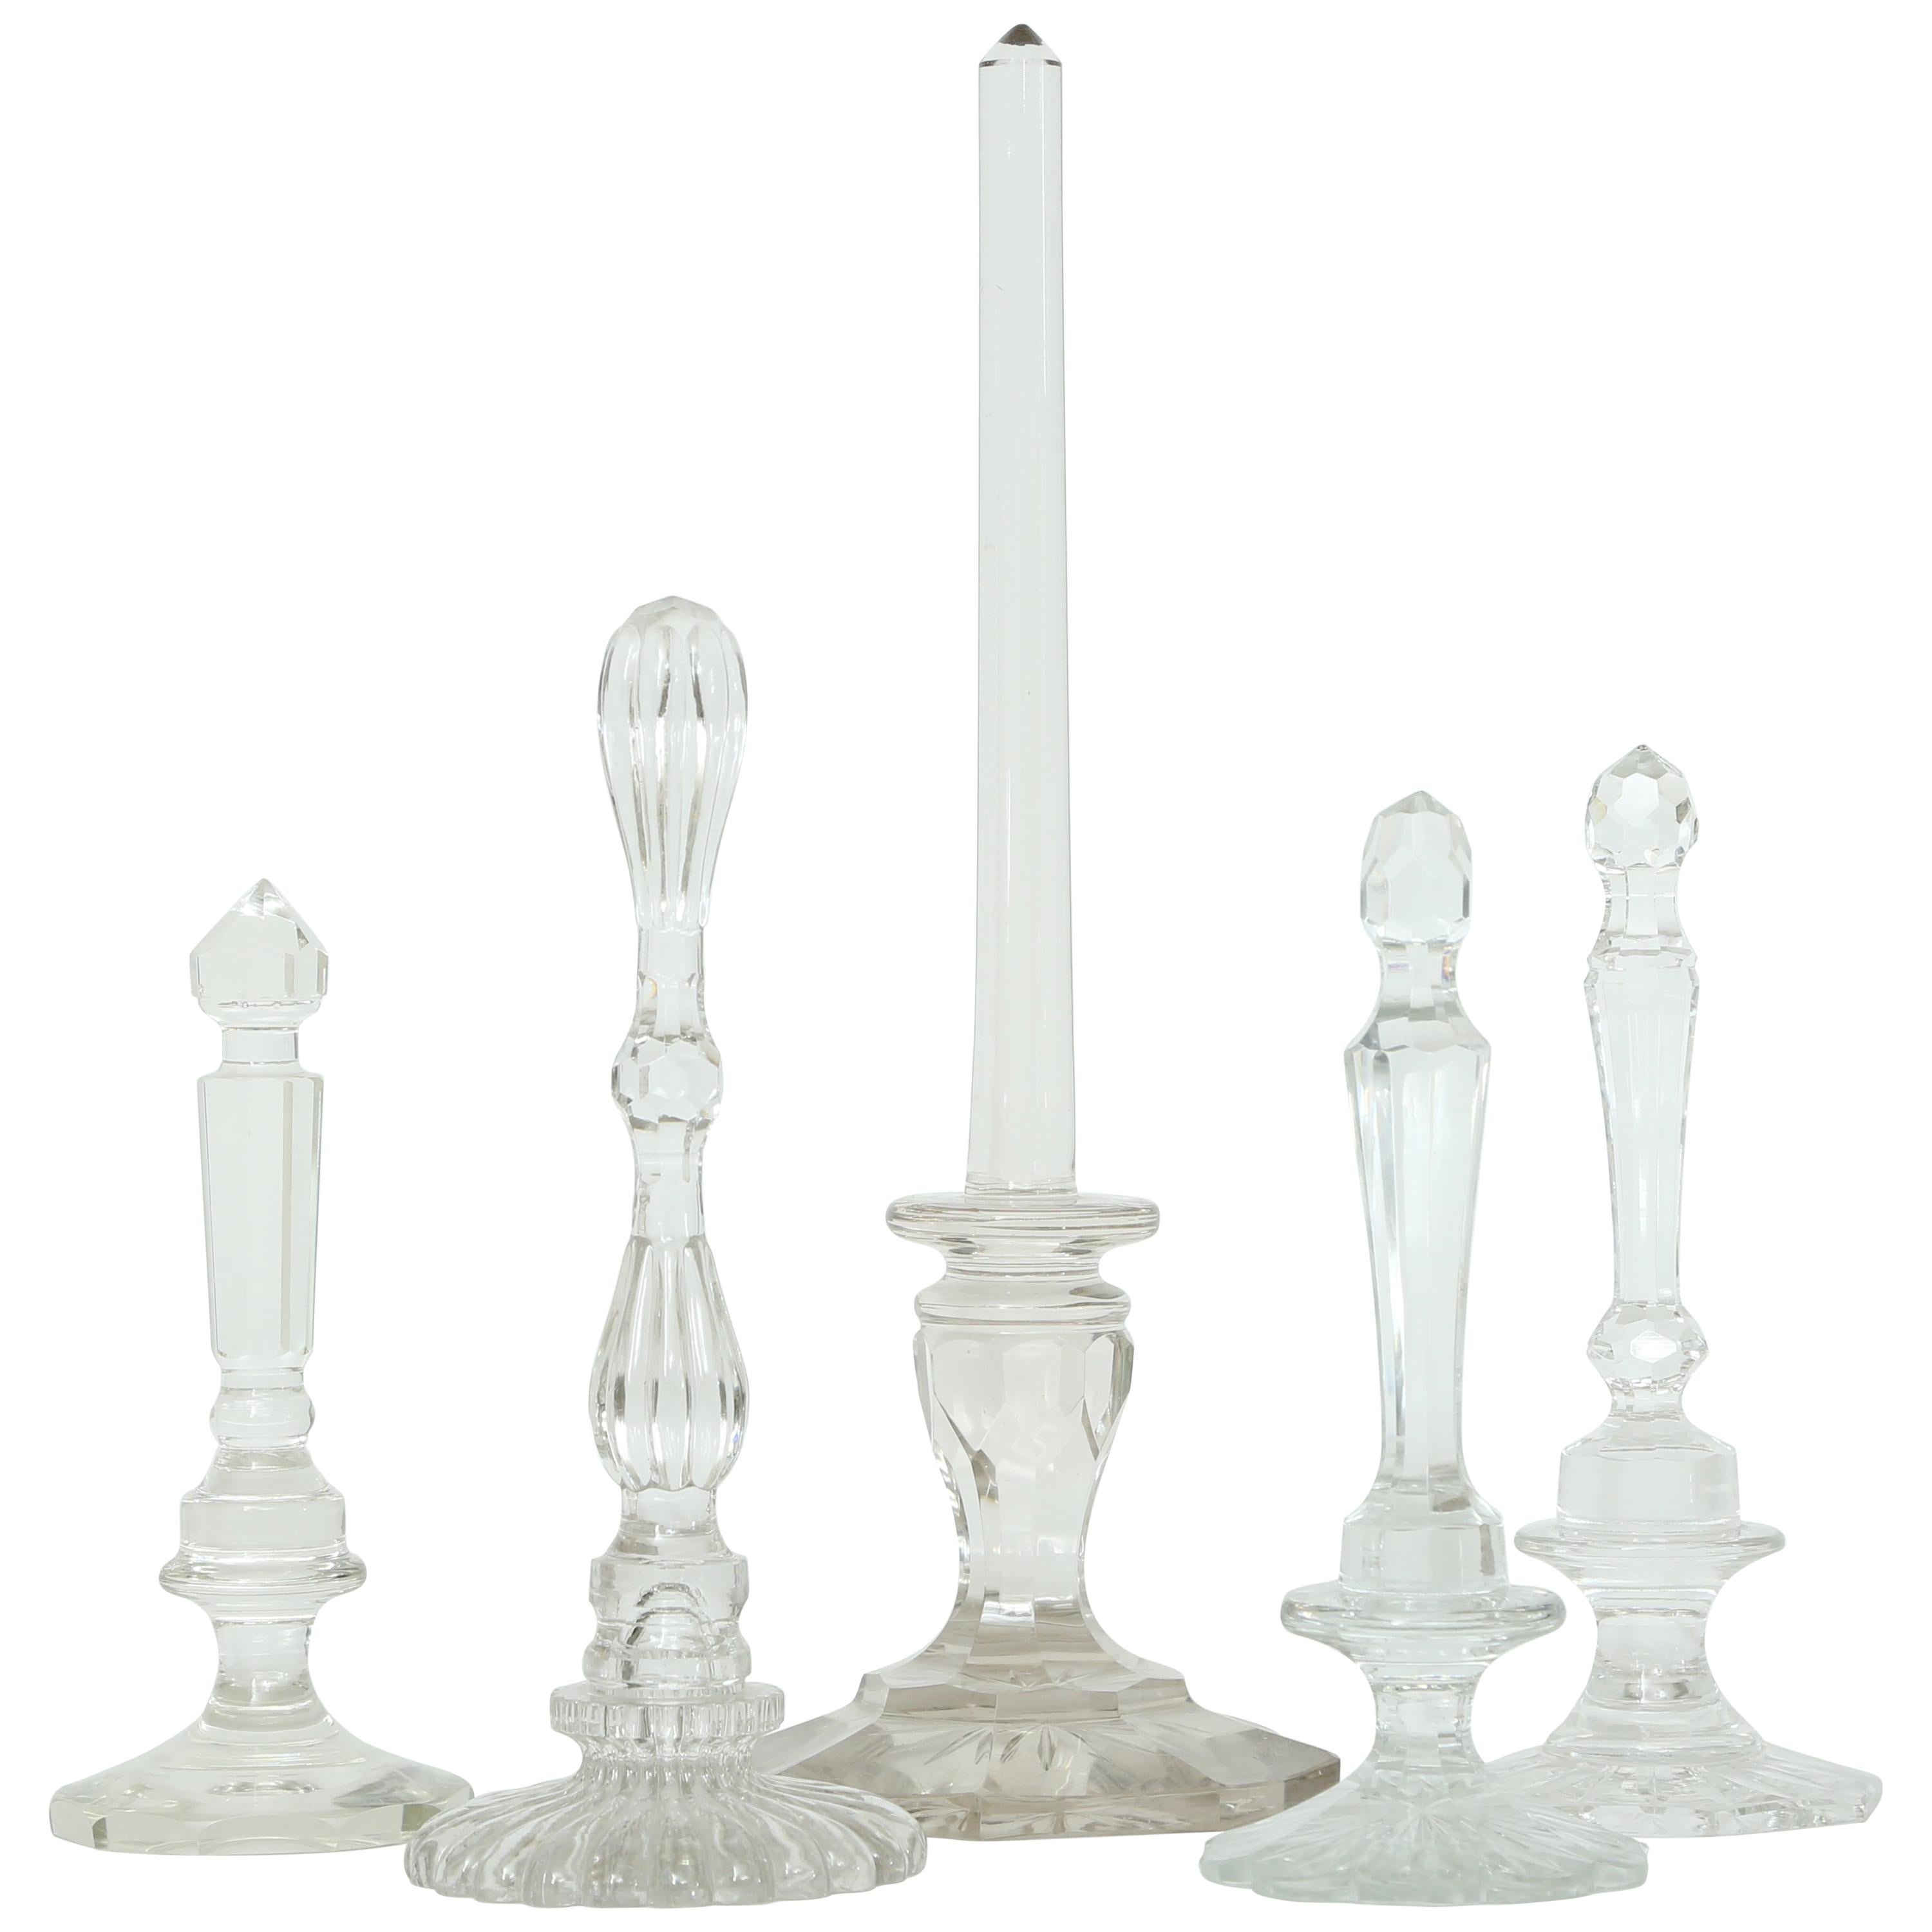 Baccarat Crystal Collection of Five Cut Columns